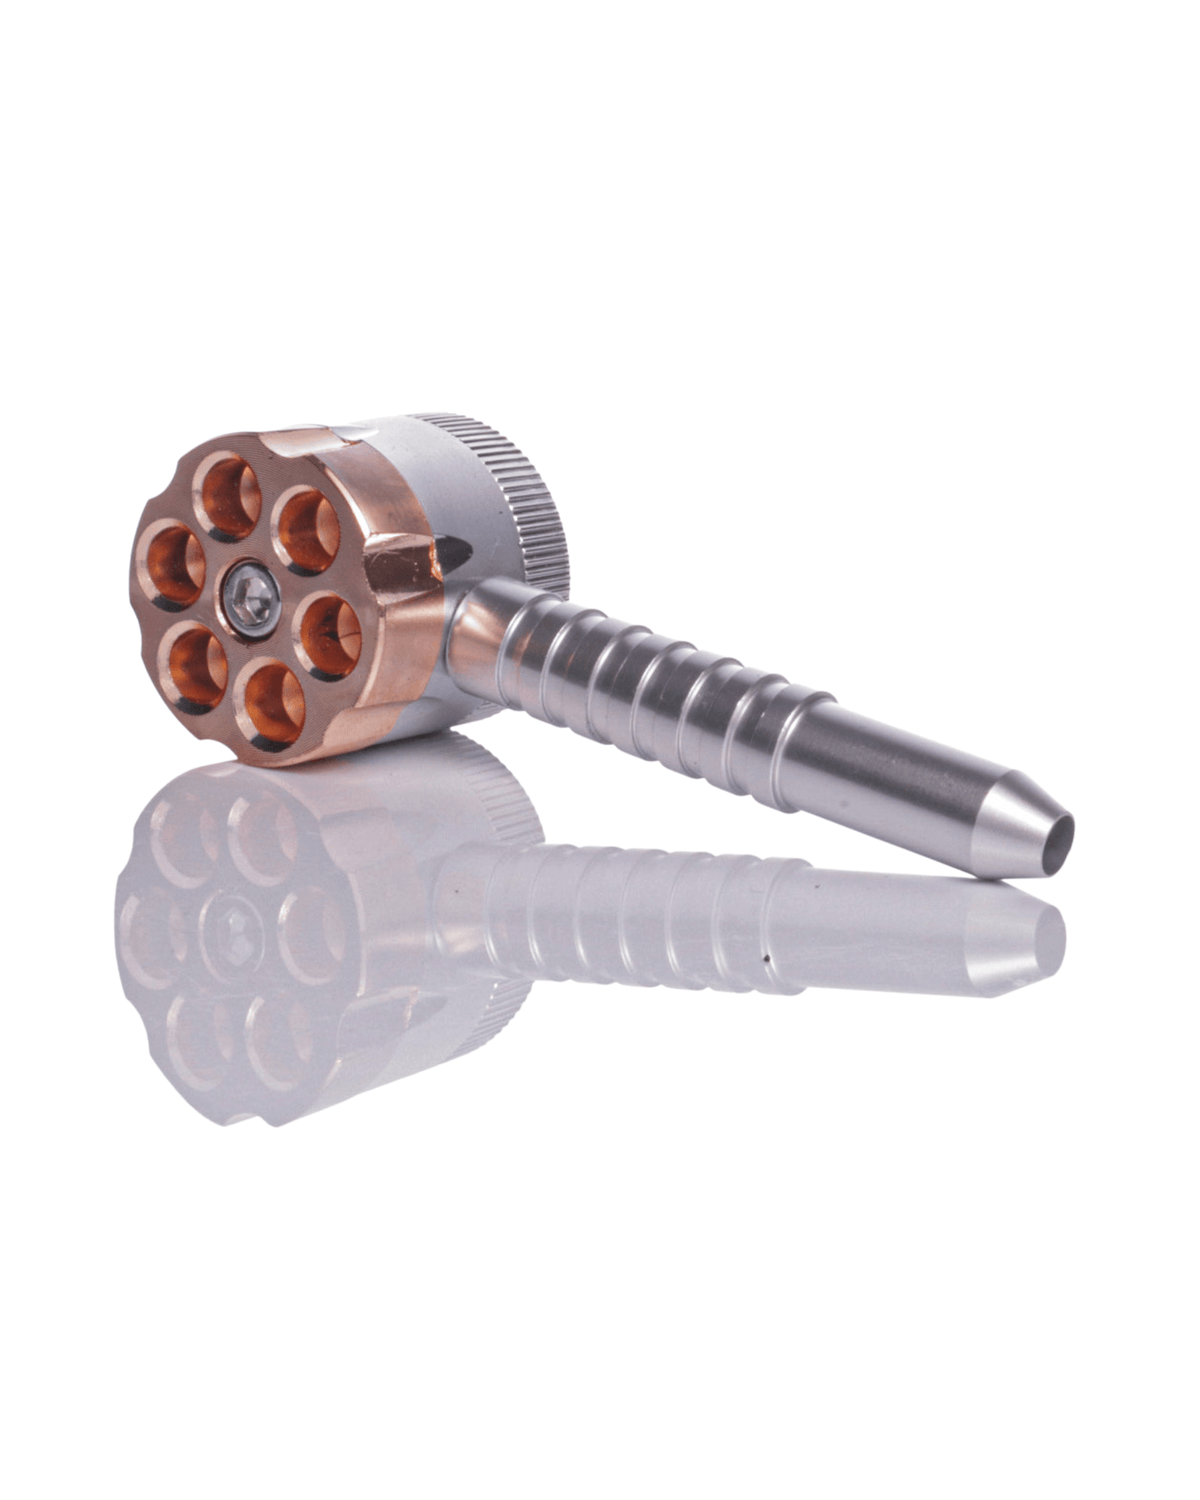 Revolver 6 Chamber Metal Pipe and Grinder worldofbongs